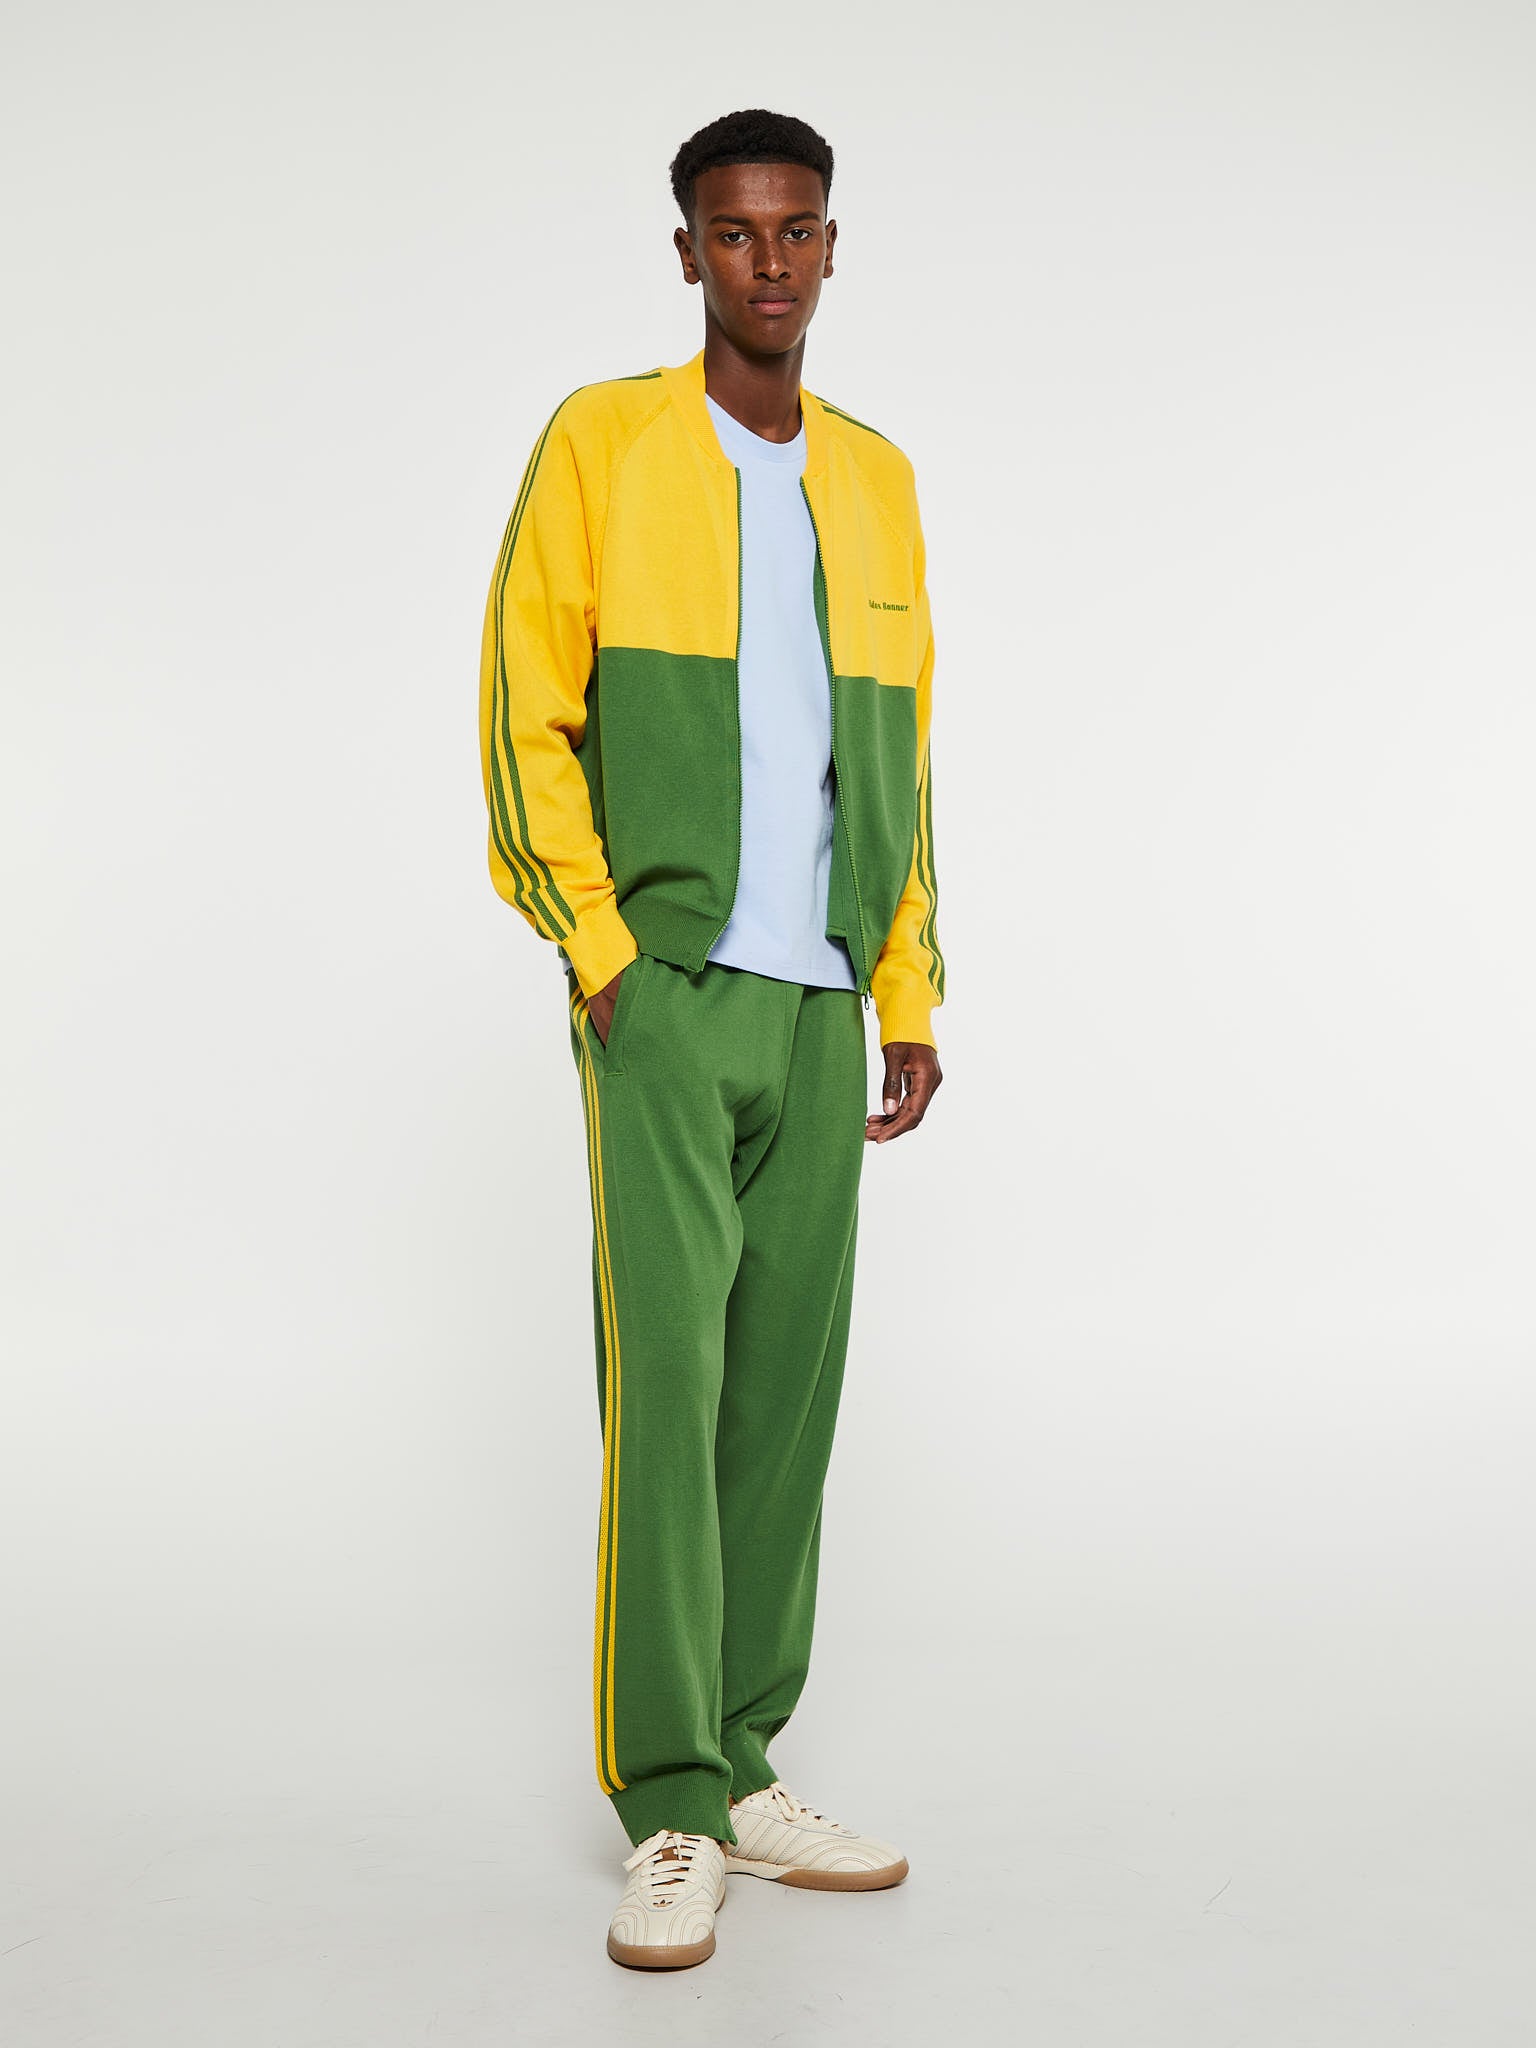 Wales Bonner New Knit Track Pants in Crew Green